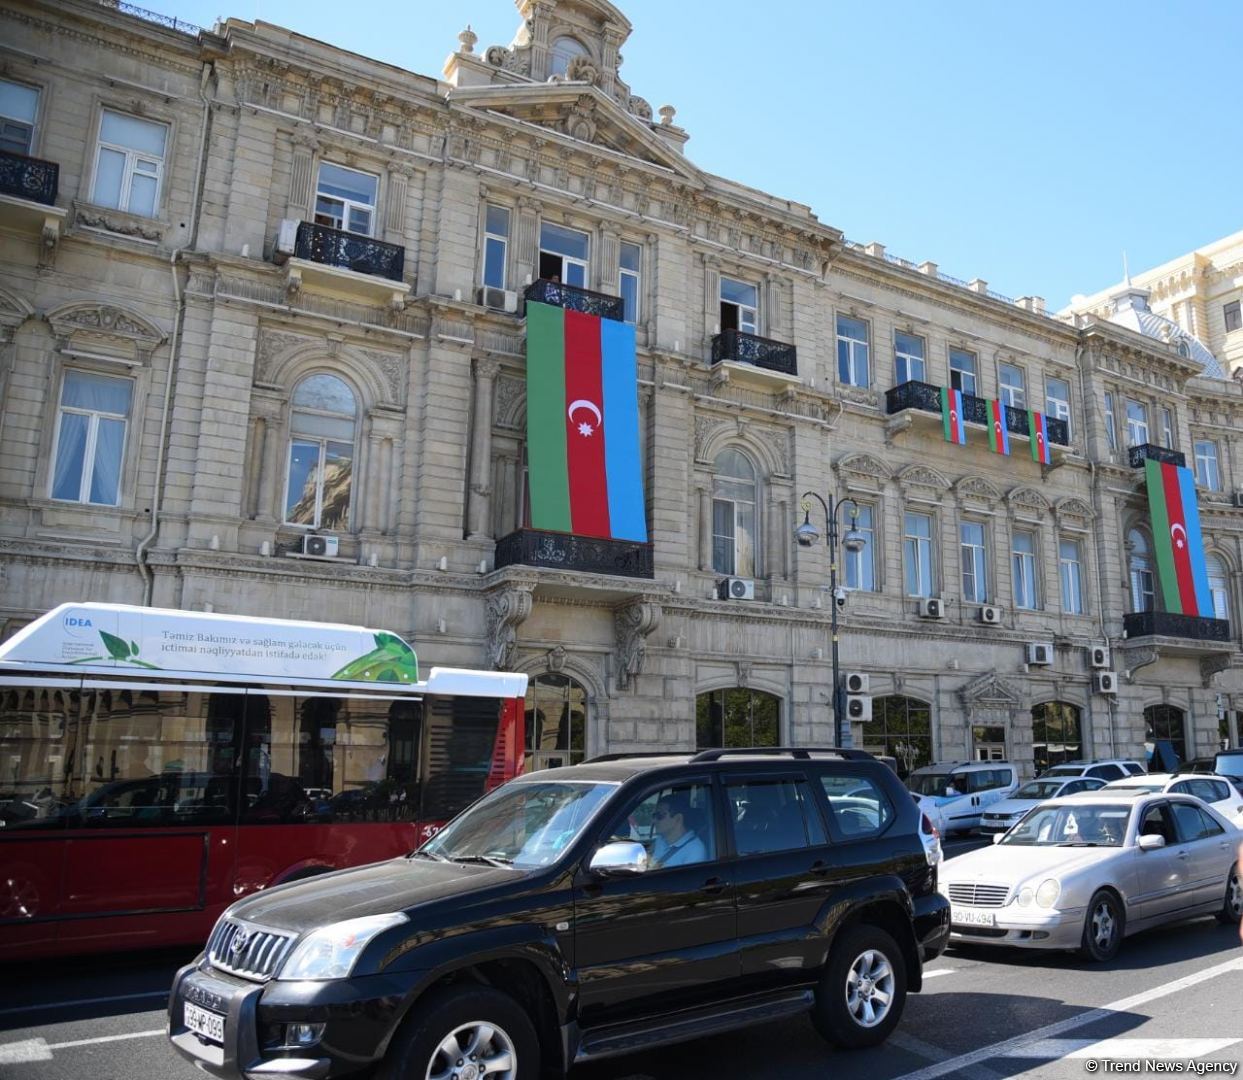 Azerbaijan holds minute of silence on occasion of Remembrance Day (PHOTO/VIDEO)